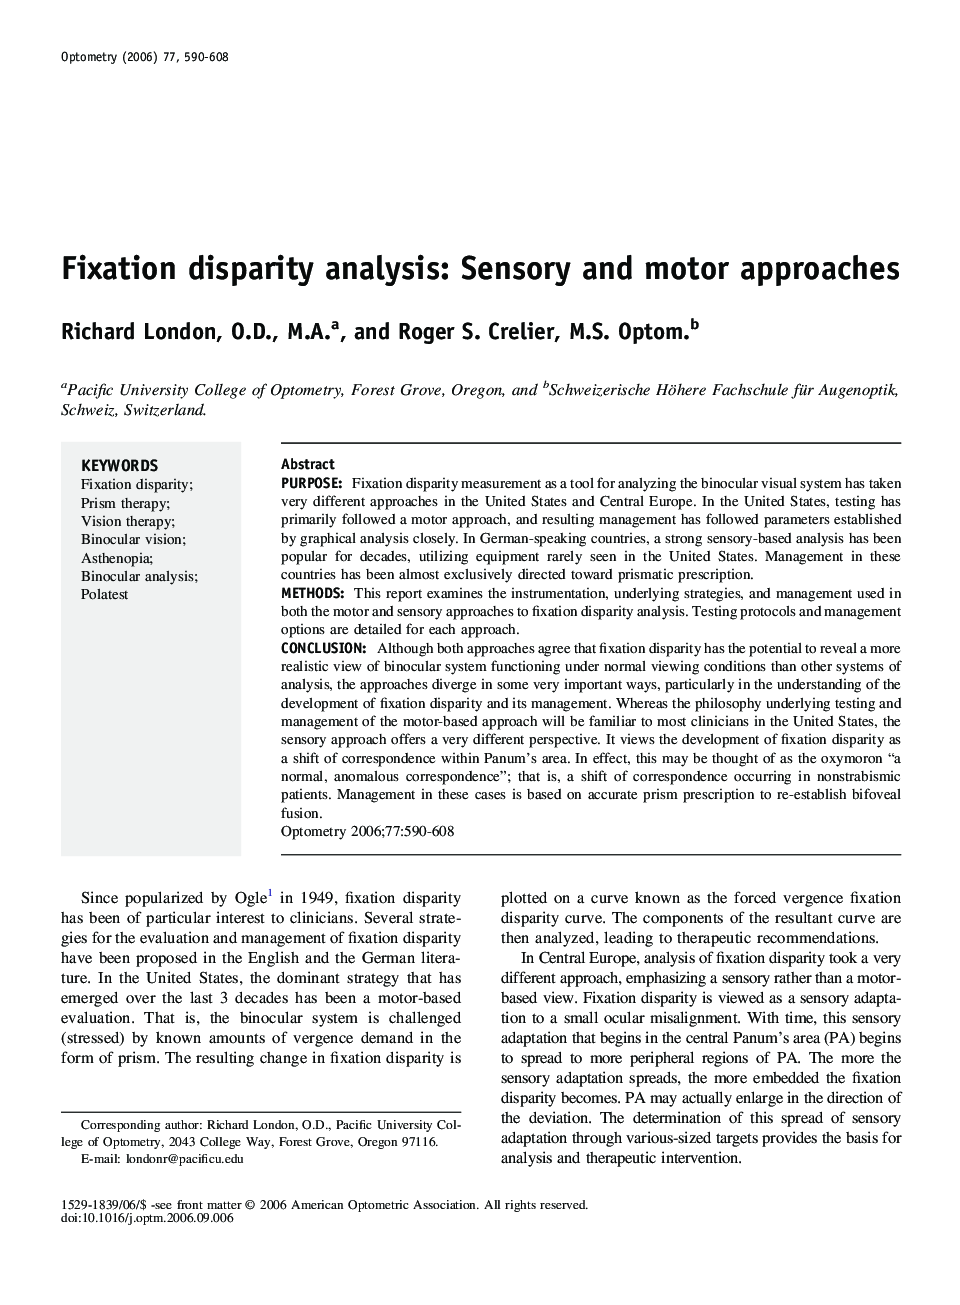 Fixation disparity analysis: Sensory and motor approaches